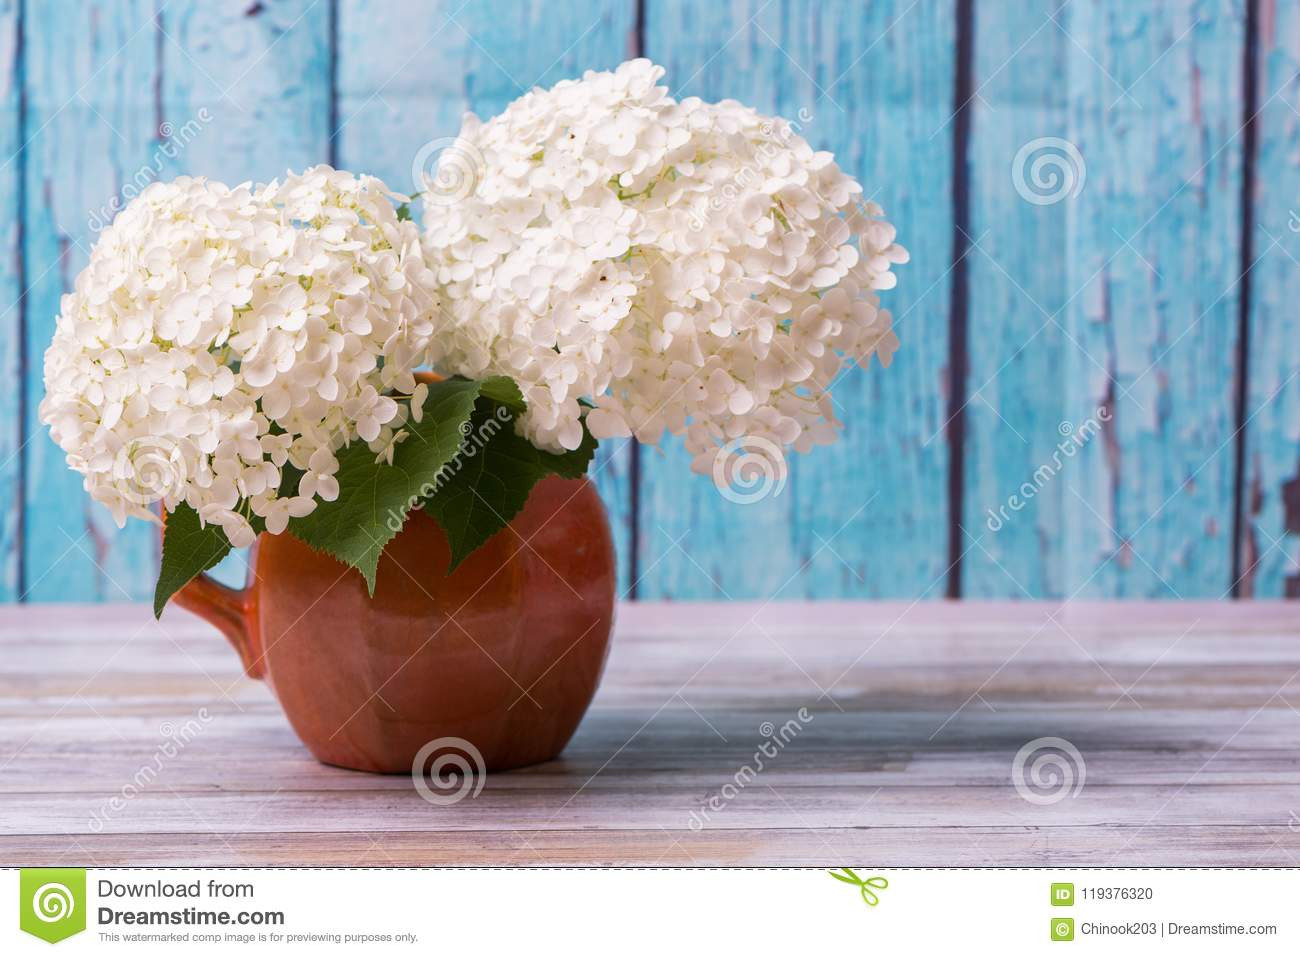 18 Spectacular Old Blue Glass Vases 2024 free download old blue glass vases of white hydrangea flowers in a rustic vase with blue background stock for white hydrangea flowers in a rustic vase with blue background